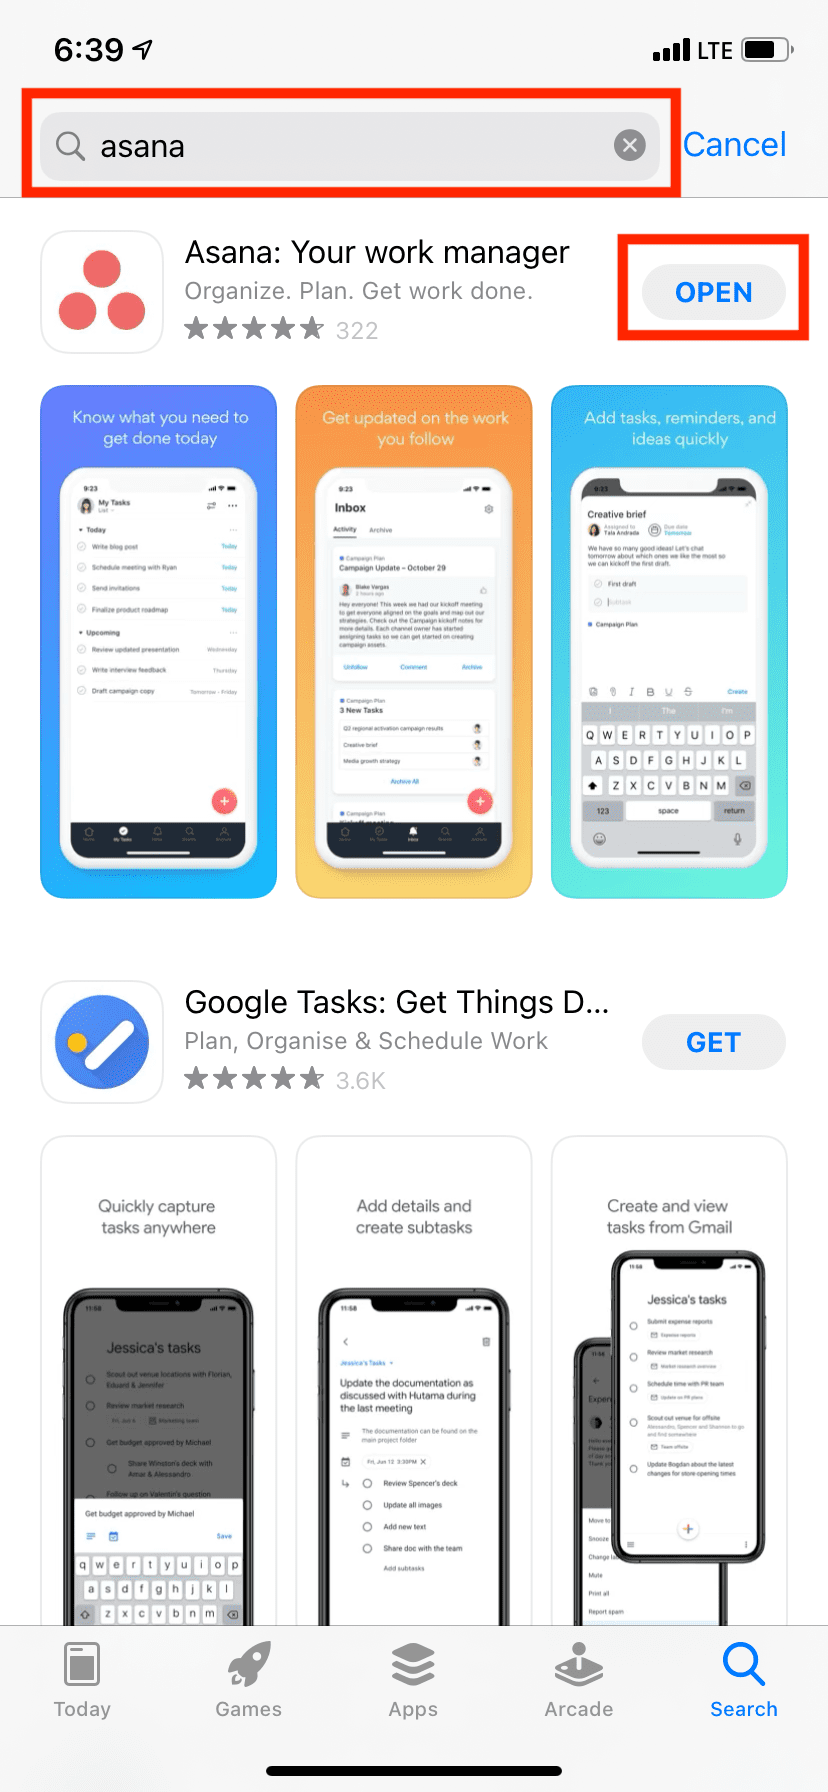 Search for app in App Store and tap Open